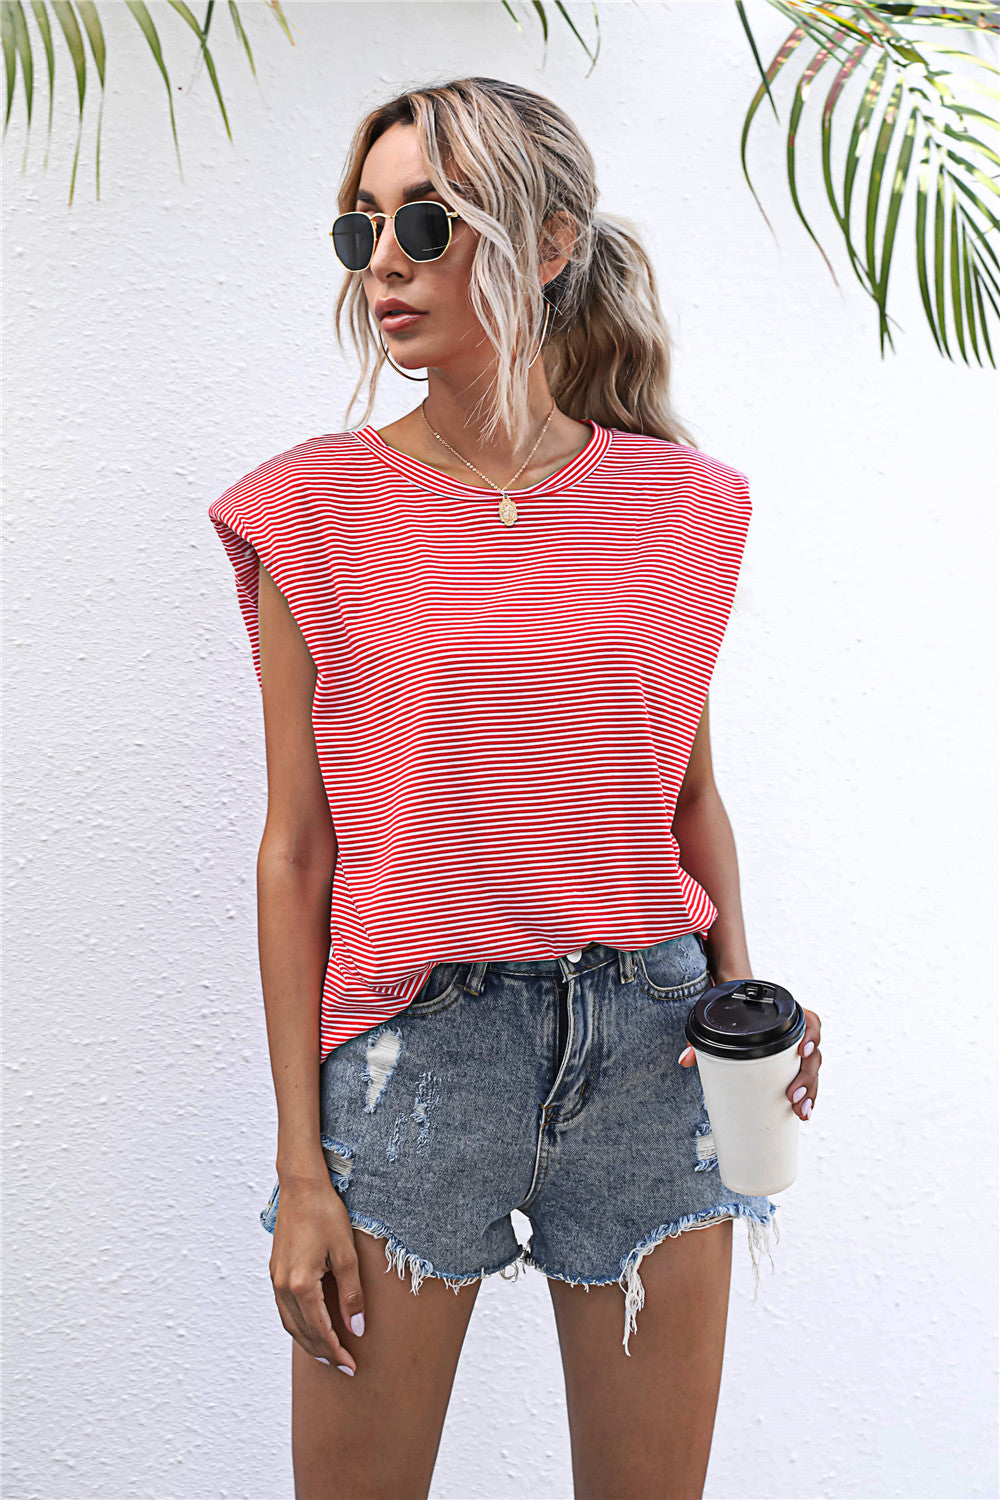 Round Neck Cap Sleeve Tee Print on any thing USA/STOD clothes